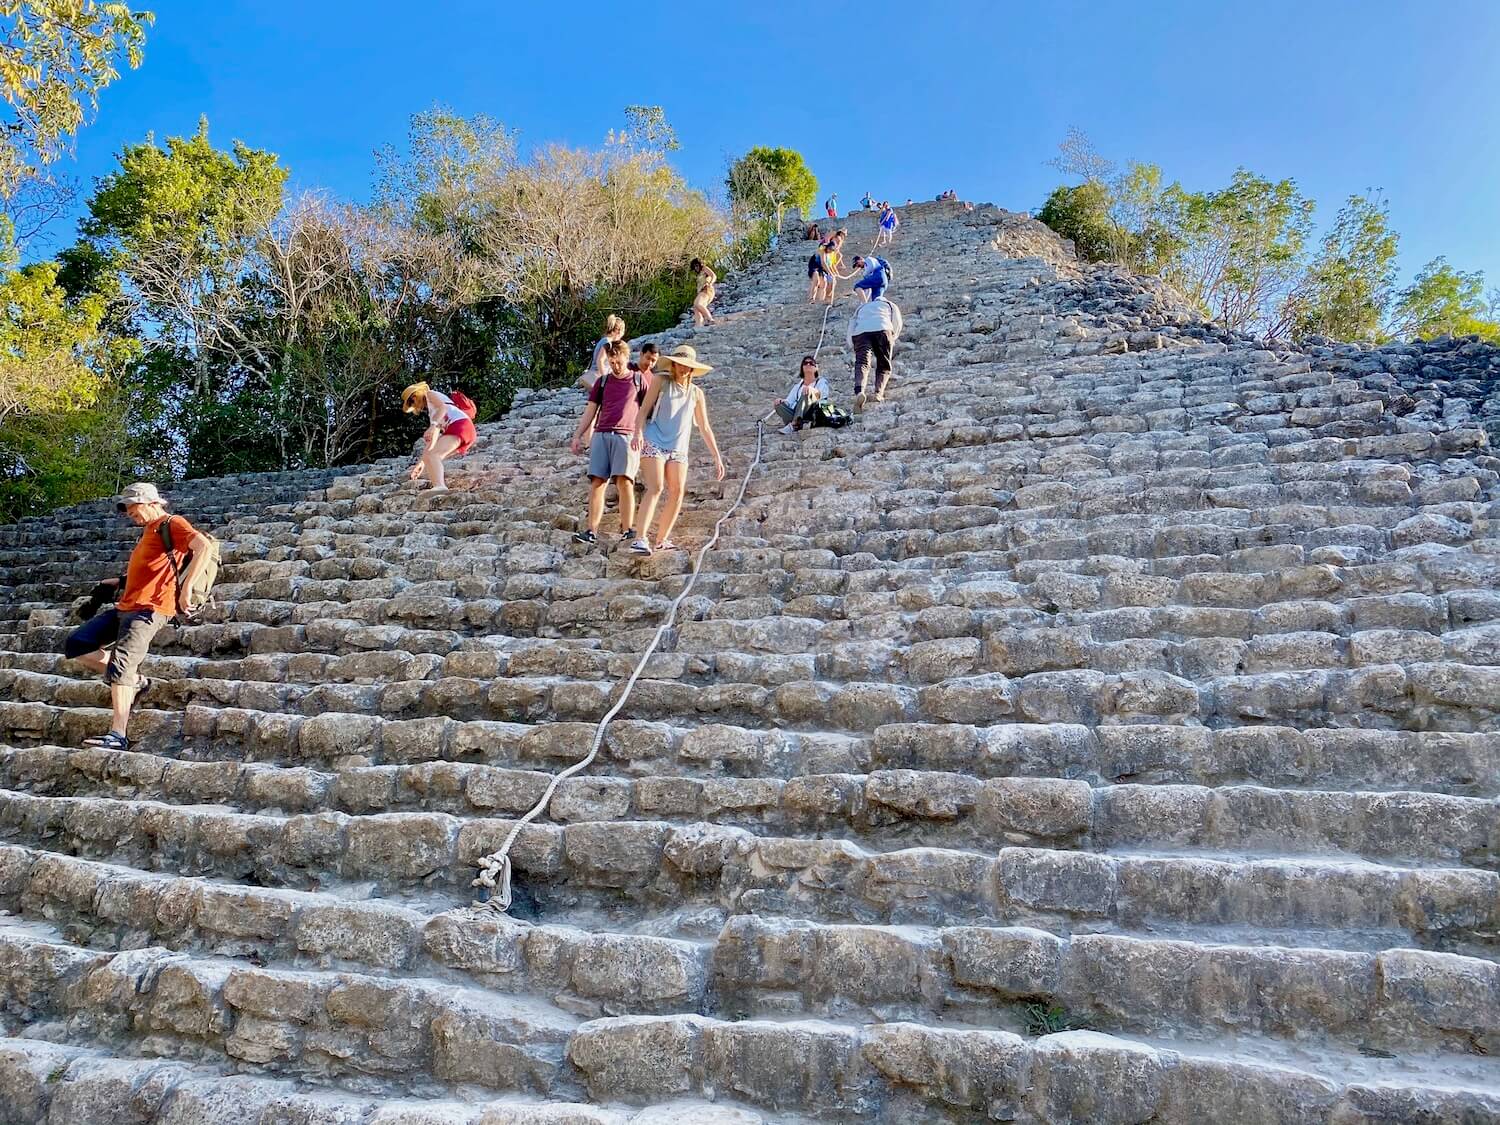 Coba travel tips definitely include climbing the highest pyramid amongst the ancient mayan ruins of Coba.  This shot is viewing from the ground level up the hundred limestone steps leading up to the top of the structure. There is a secure rope in the center of the steps with a dozen tourists making their way up and down. Behind the pyramid are jungle trees with blue sky.